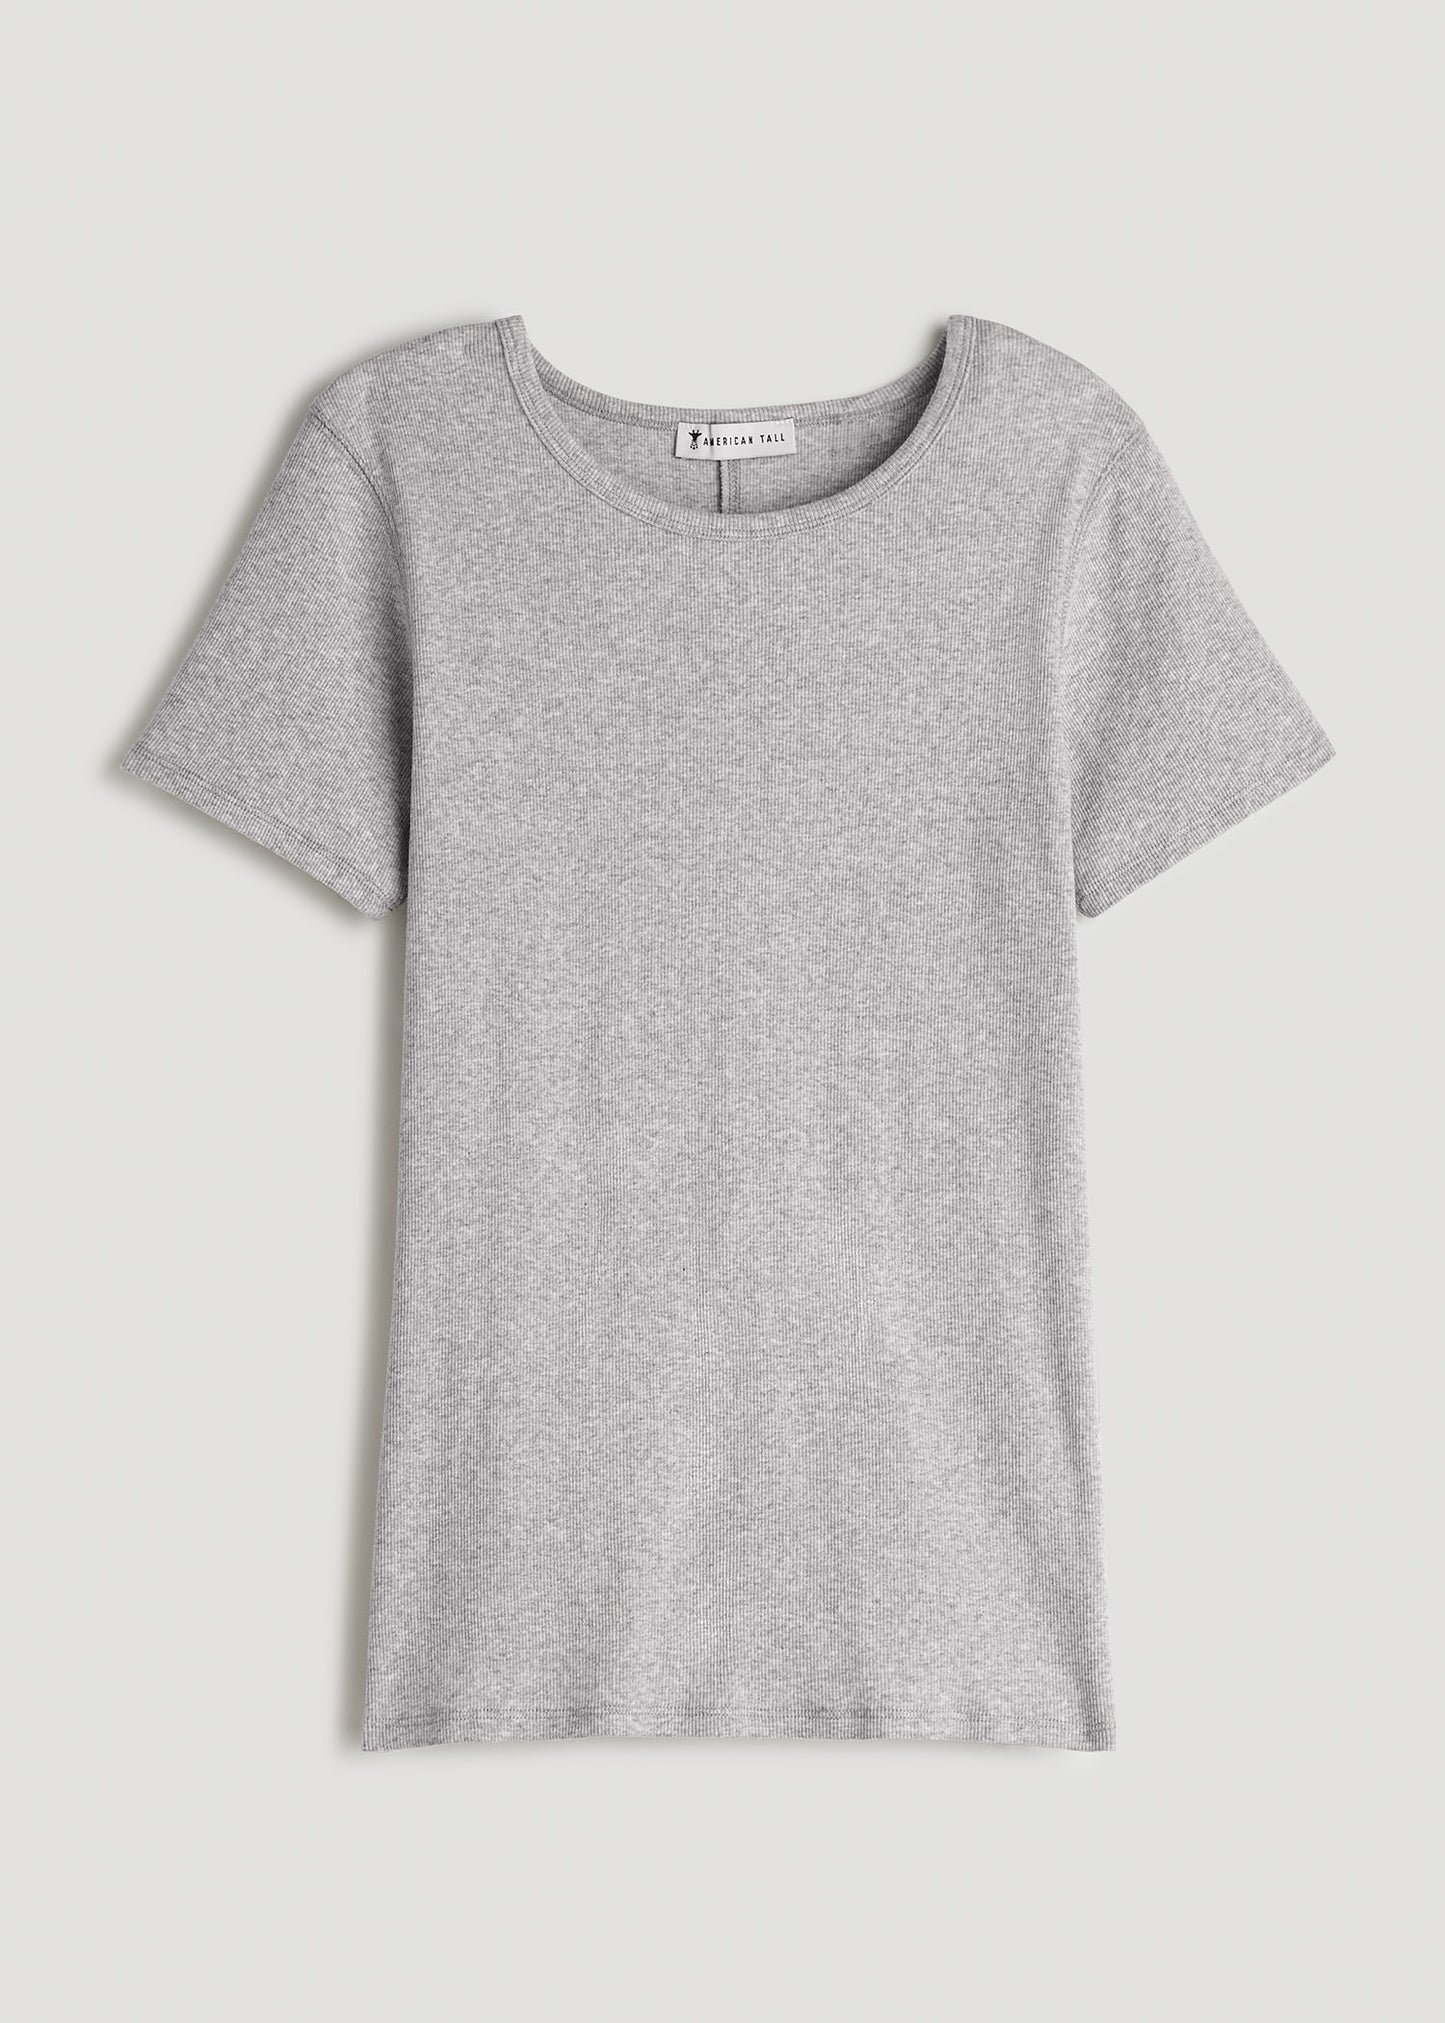 Short Sleeve Crew Neck Ribbed T-Shirt for Tall Women in Grey Mix